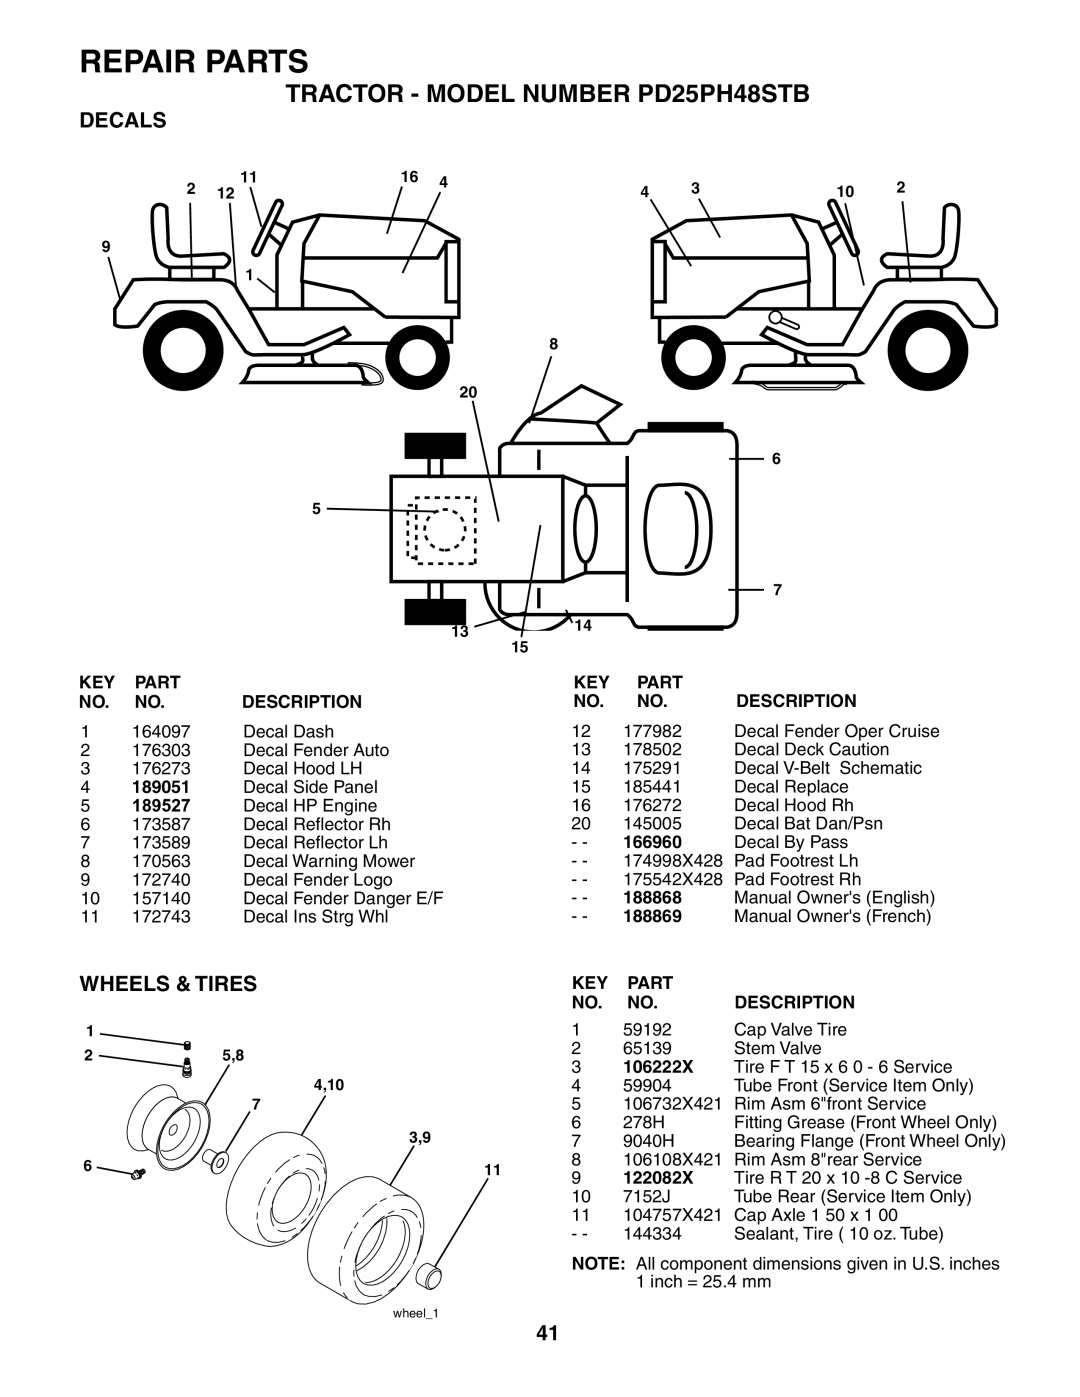 Poulan owner manual Decals, Wheels & Tires, Repair Parts, TRACTOR - MODEL NUMBER PD25PH48STB, 189527 